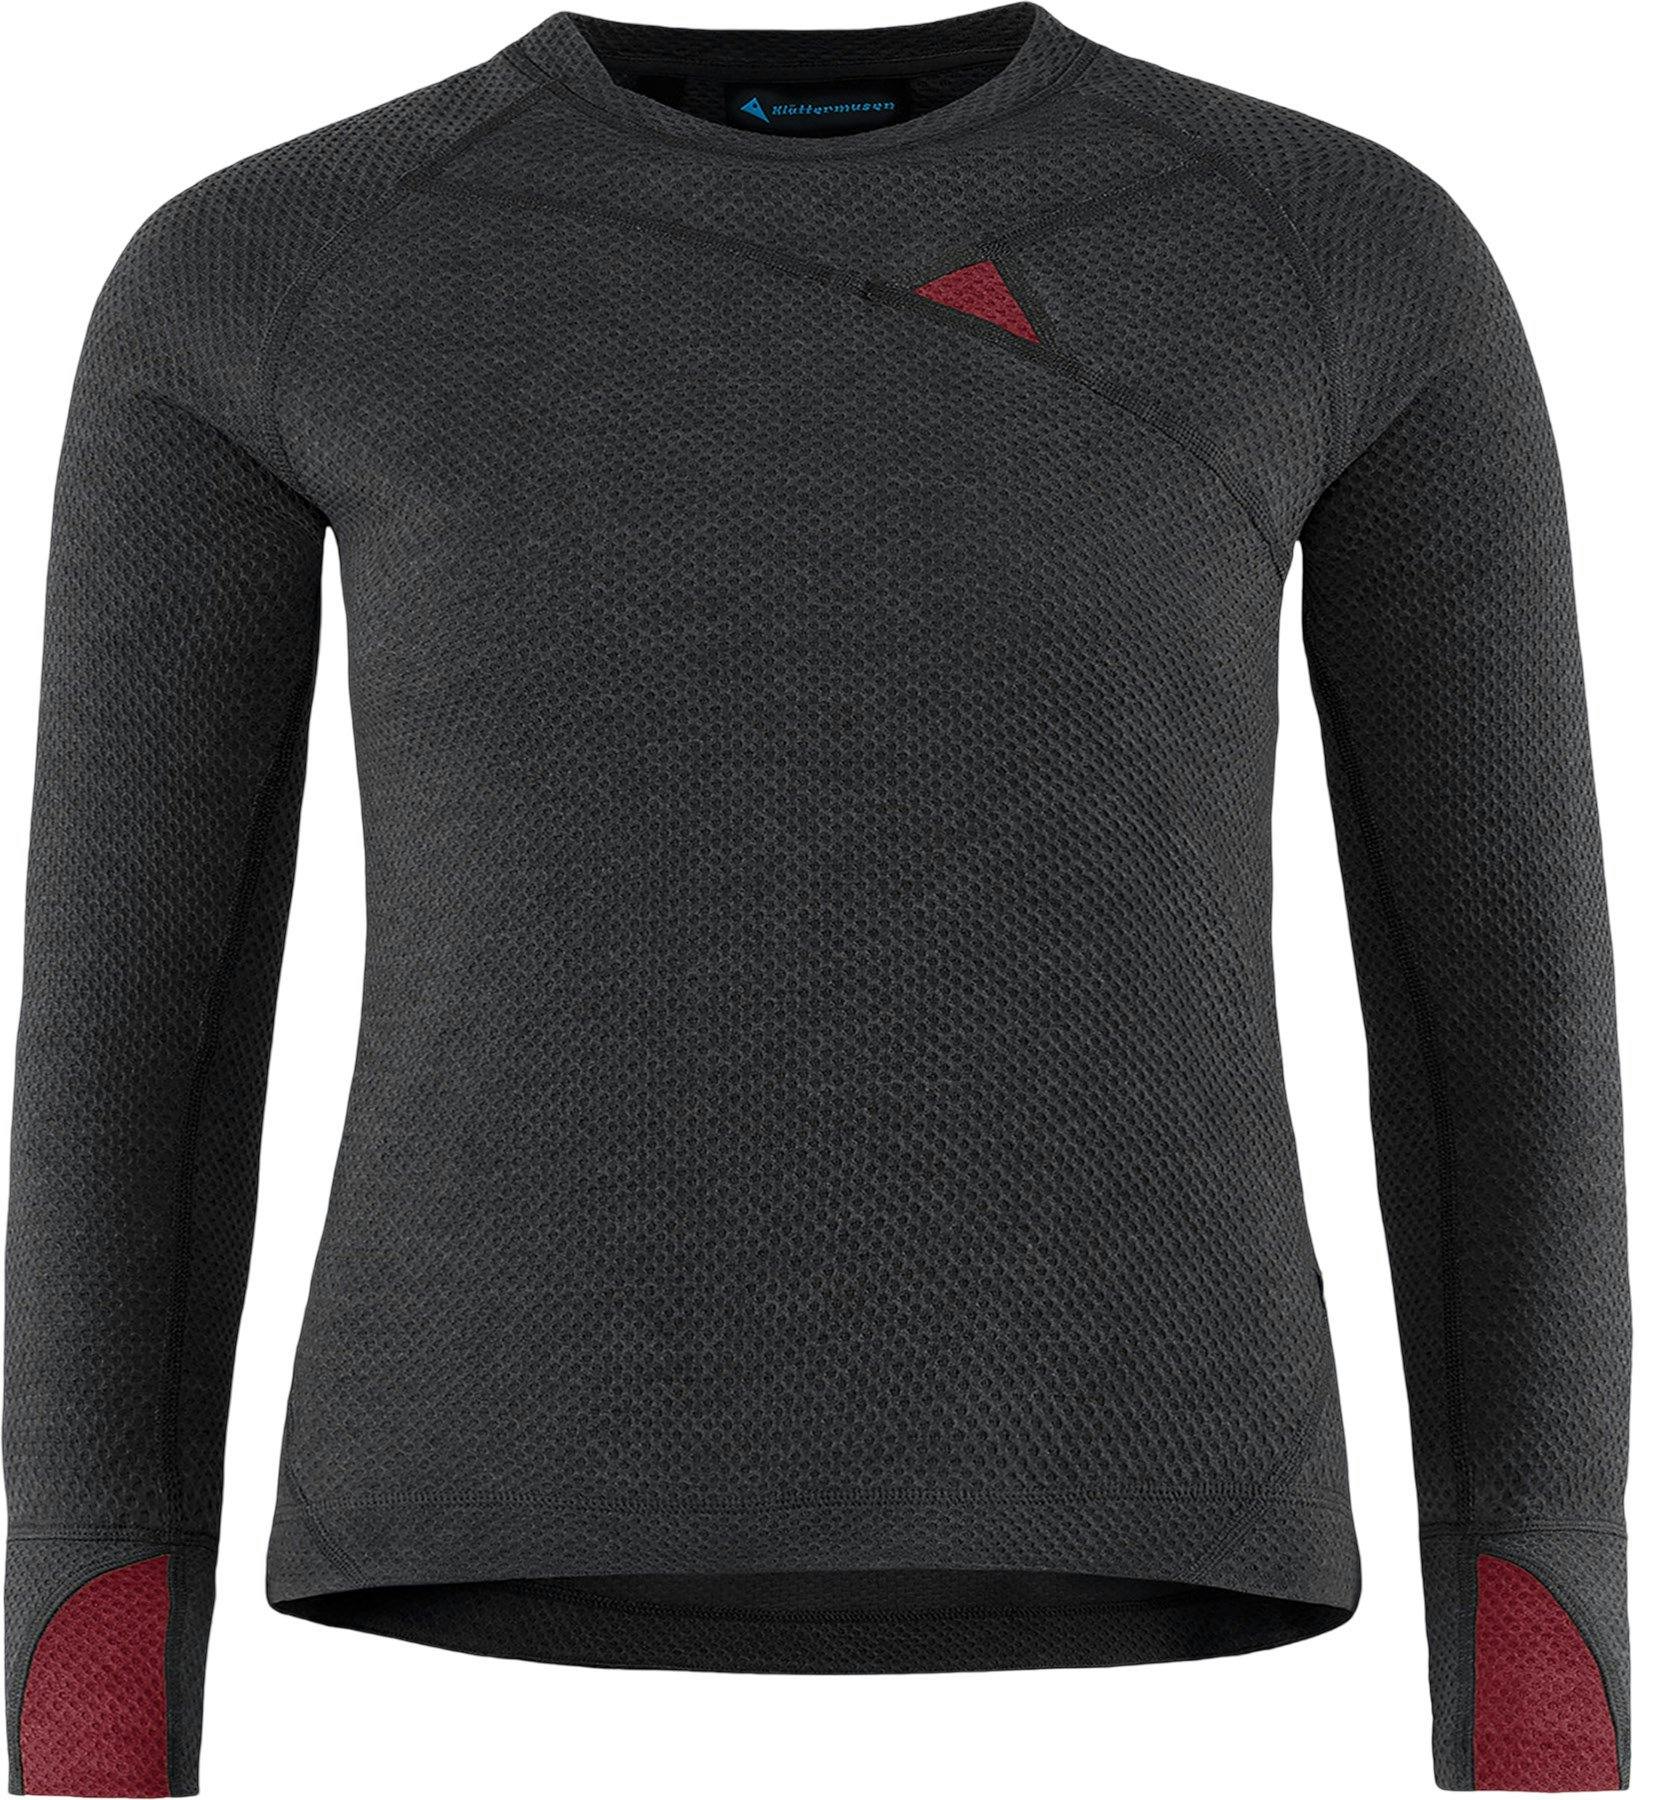 Product image for Huge Crew Neck Sweater - Women's